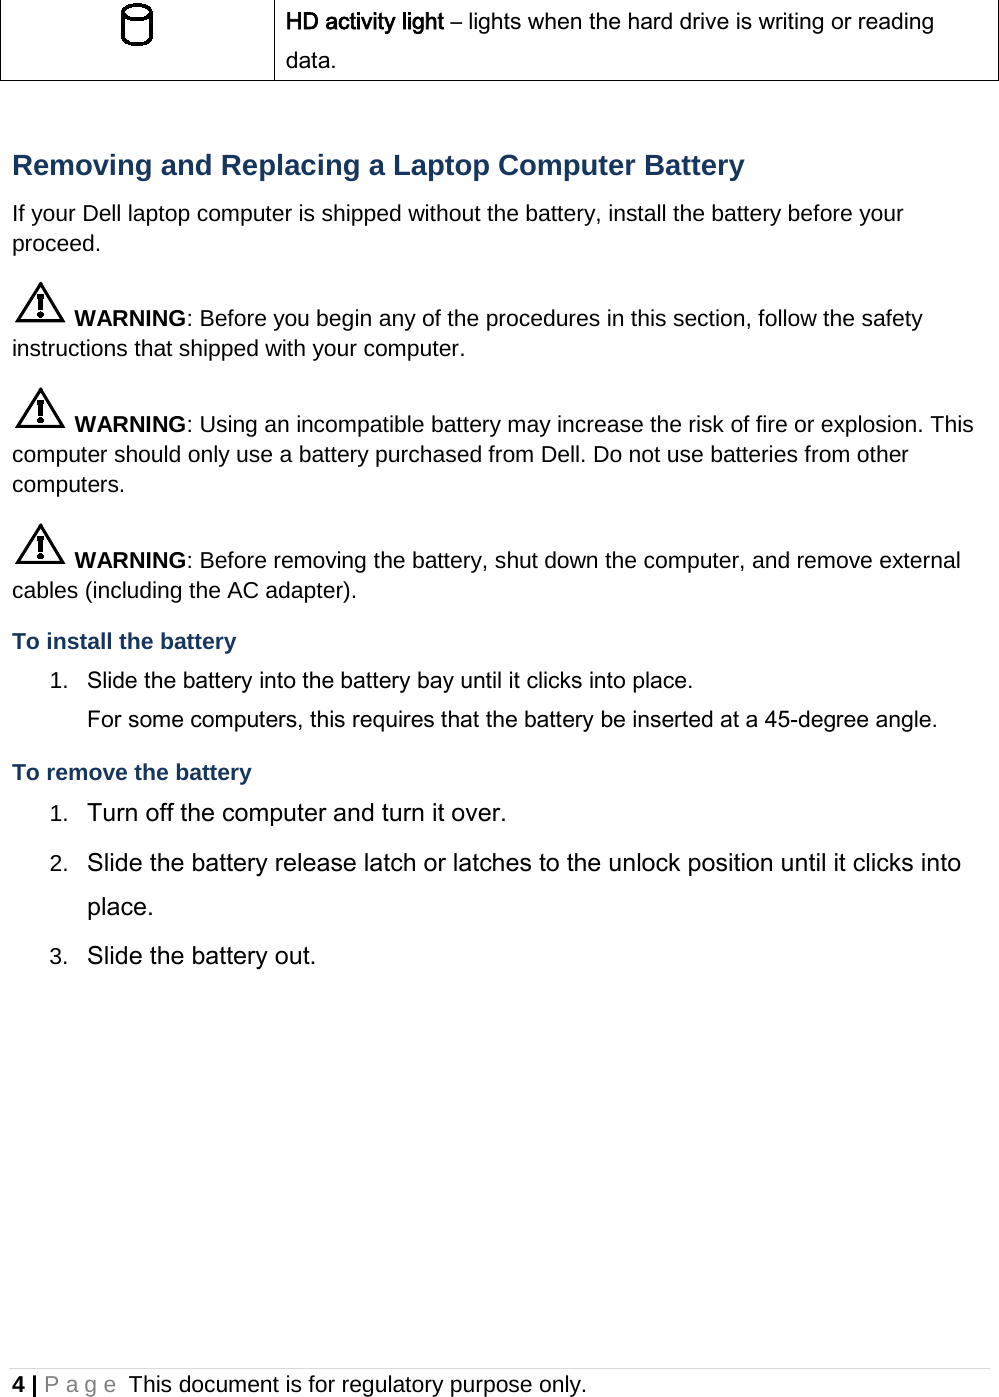 4 | Page This document is for regulatory purpose only.   HD activity light – lights when the hard drive is writing or reading data.  Removing and Replacing a Laptop Computer Battery If your Dell laptop computer is shipped without the battery, install the battery before your proceed.  WARNING: Before you begin any of the procedures in this section, follow the safety instructions that shipped with your computer.  WARNING: Using an incompatible battery may increase the risk of fire or explosion. This computer should only use a battery purchased from Dell. Do not use batteries from other computers.  WARNING: Before removing the battery, shut down the computer, and remove external cables (including the AC adapter). To install the battery 1. Slide the battery into the battery bay until it clicks into place.  For some computers, this requires that the battery be inserted at a 45-degree angle. To remove the battery 1. Turn off the computer and turn it over. 2. Slide the battery release latch or latches to the unlock position until it clicks into place. 3. Slide the battery out.    